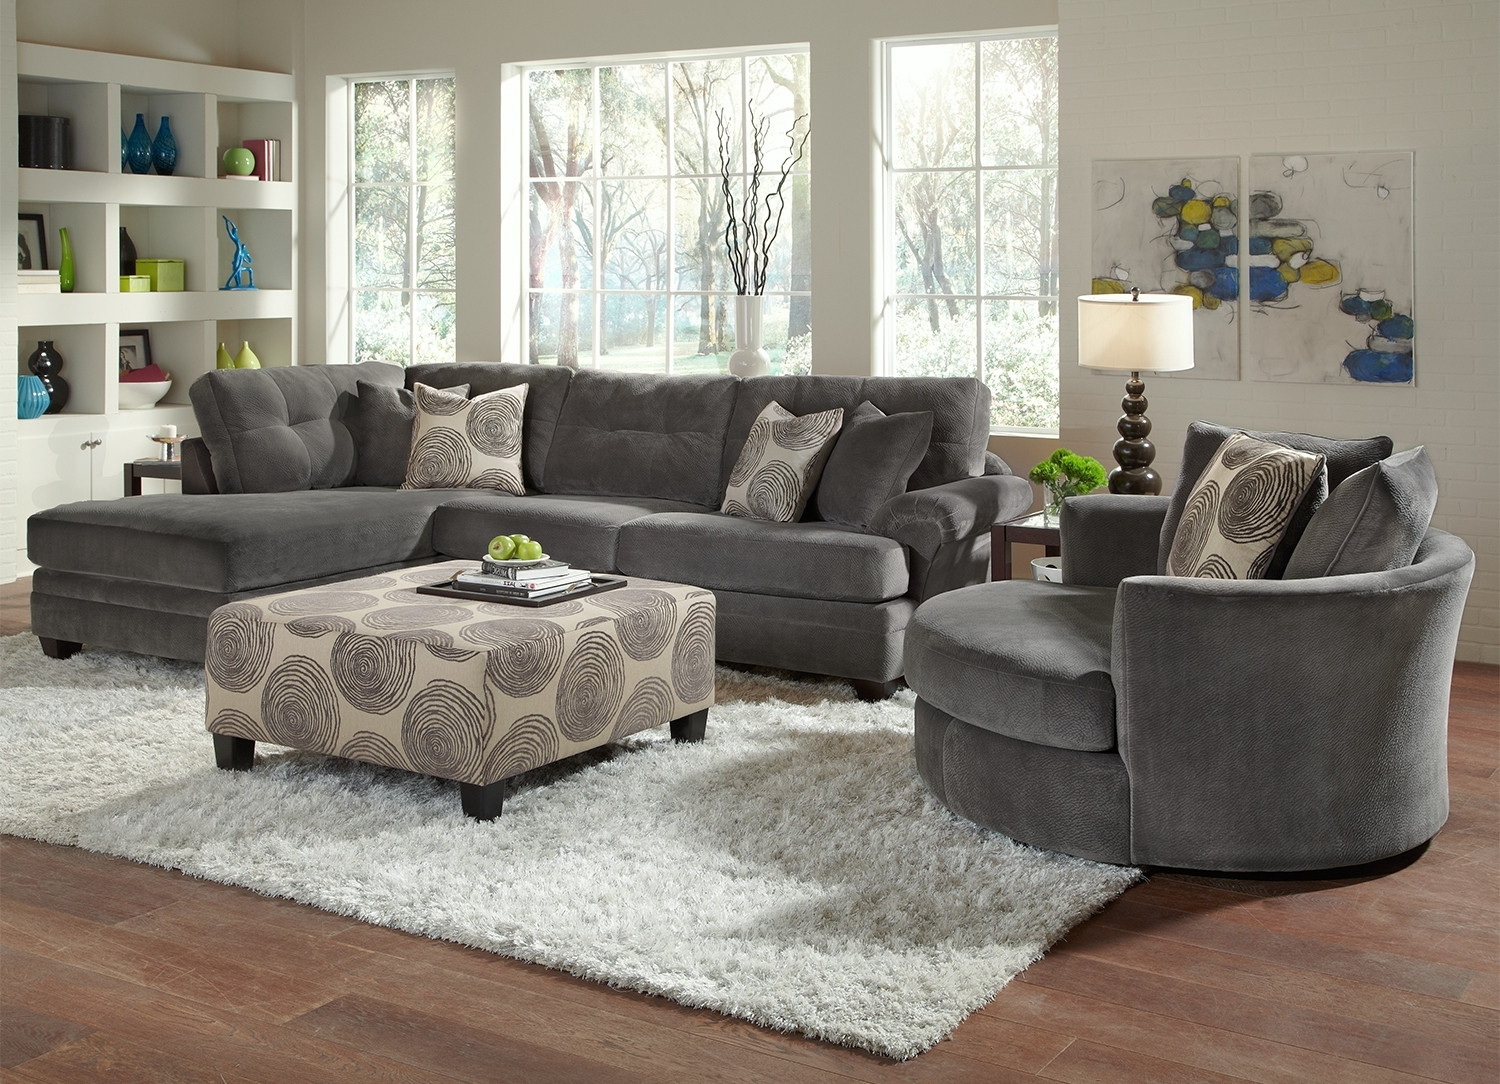 Modern Living Room Sets Cheap
 Tips to Buy Swivel Chairs for Living Room